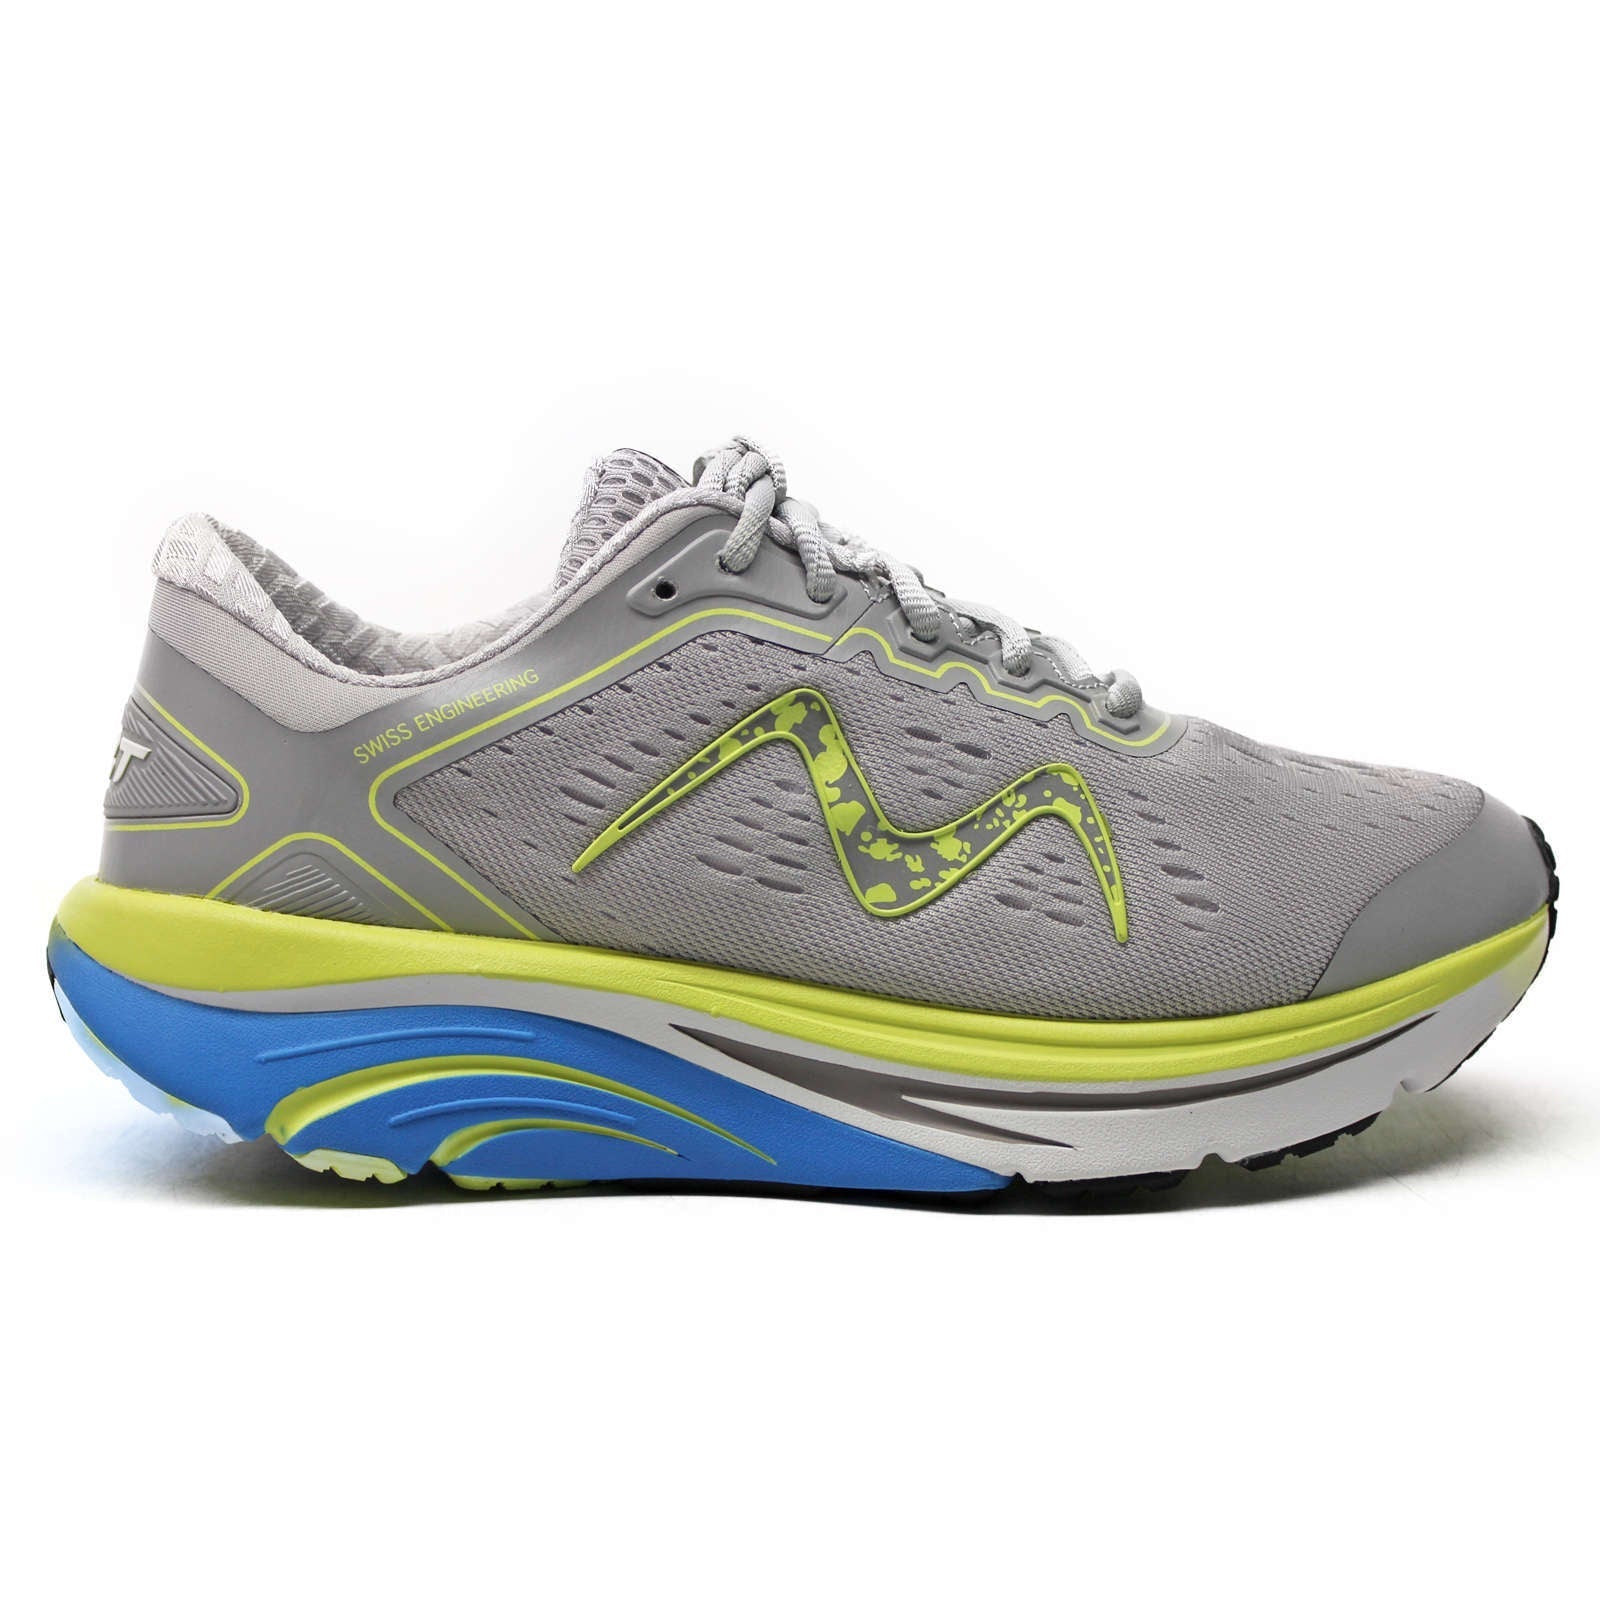 MBT GTC-2000 Mesh Women's Low-Top Sneakers#color_grey lime yellow